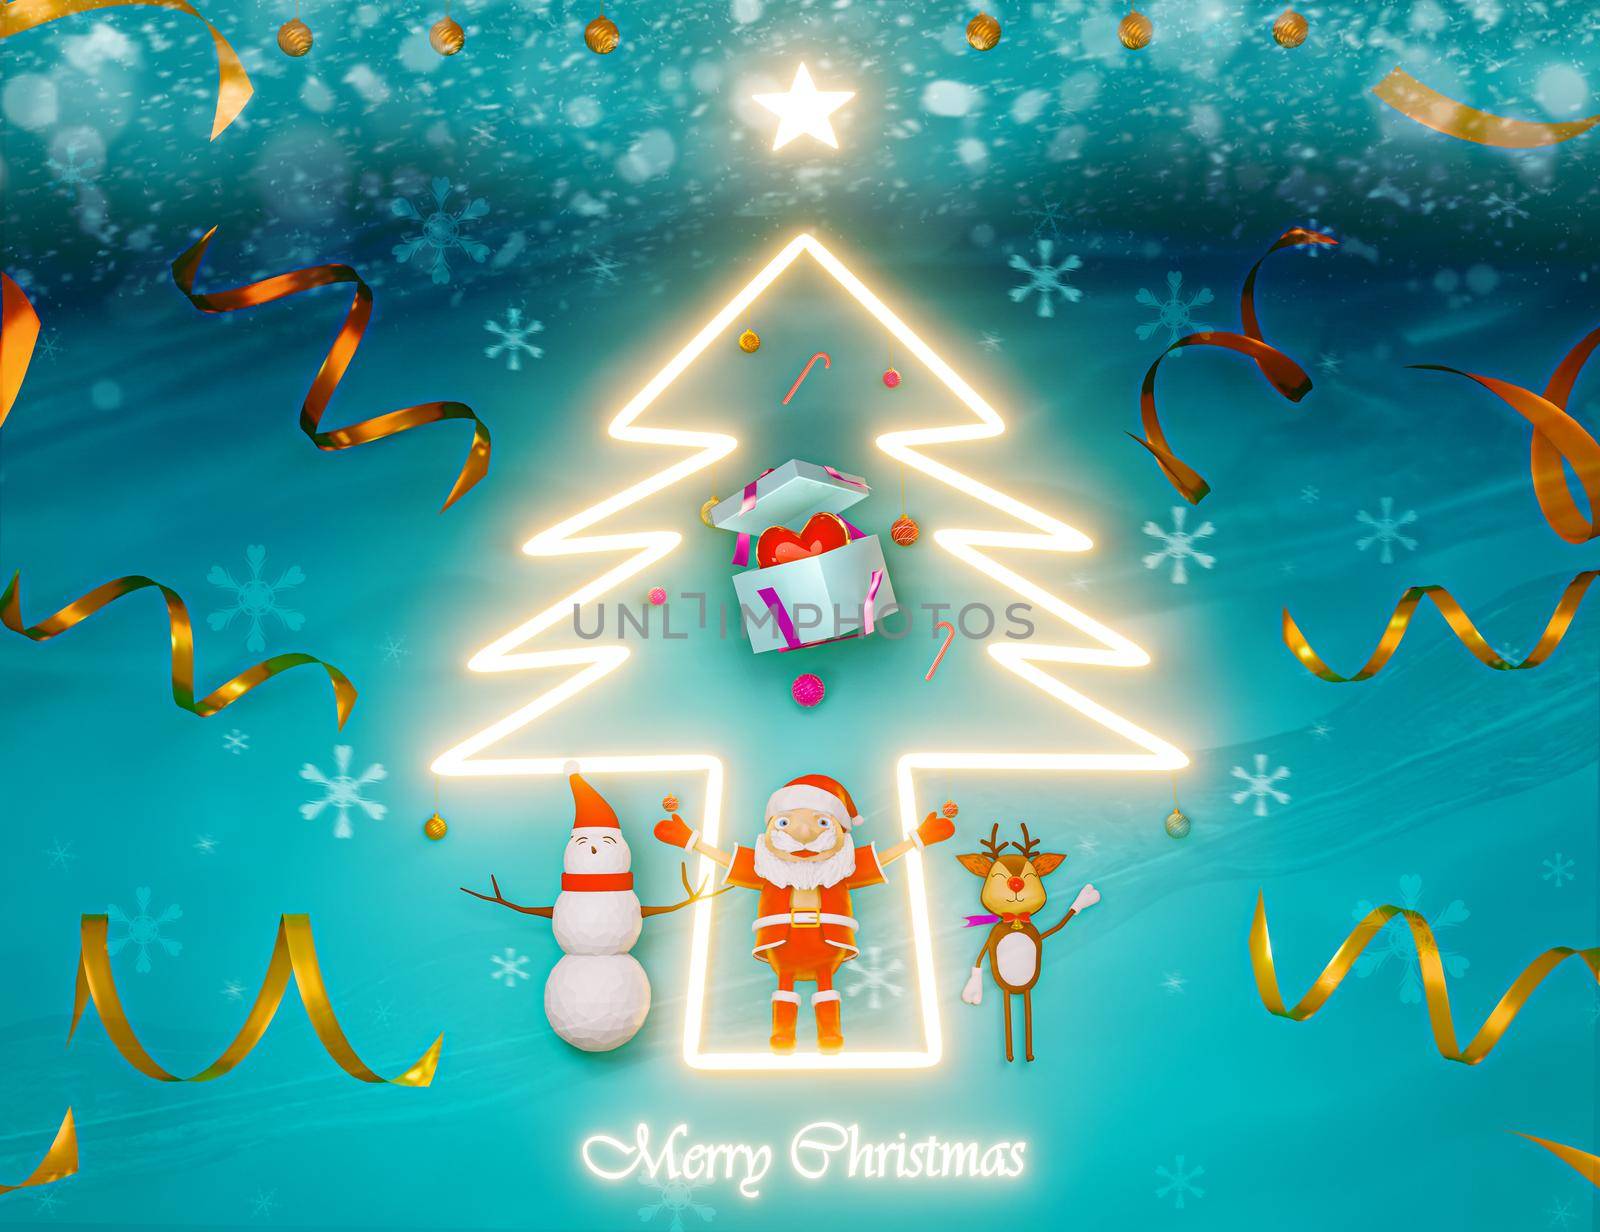 Merry Christmas and Happy New Year with santa claus and cute reindeer and pine tree glowing .3D illustration.